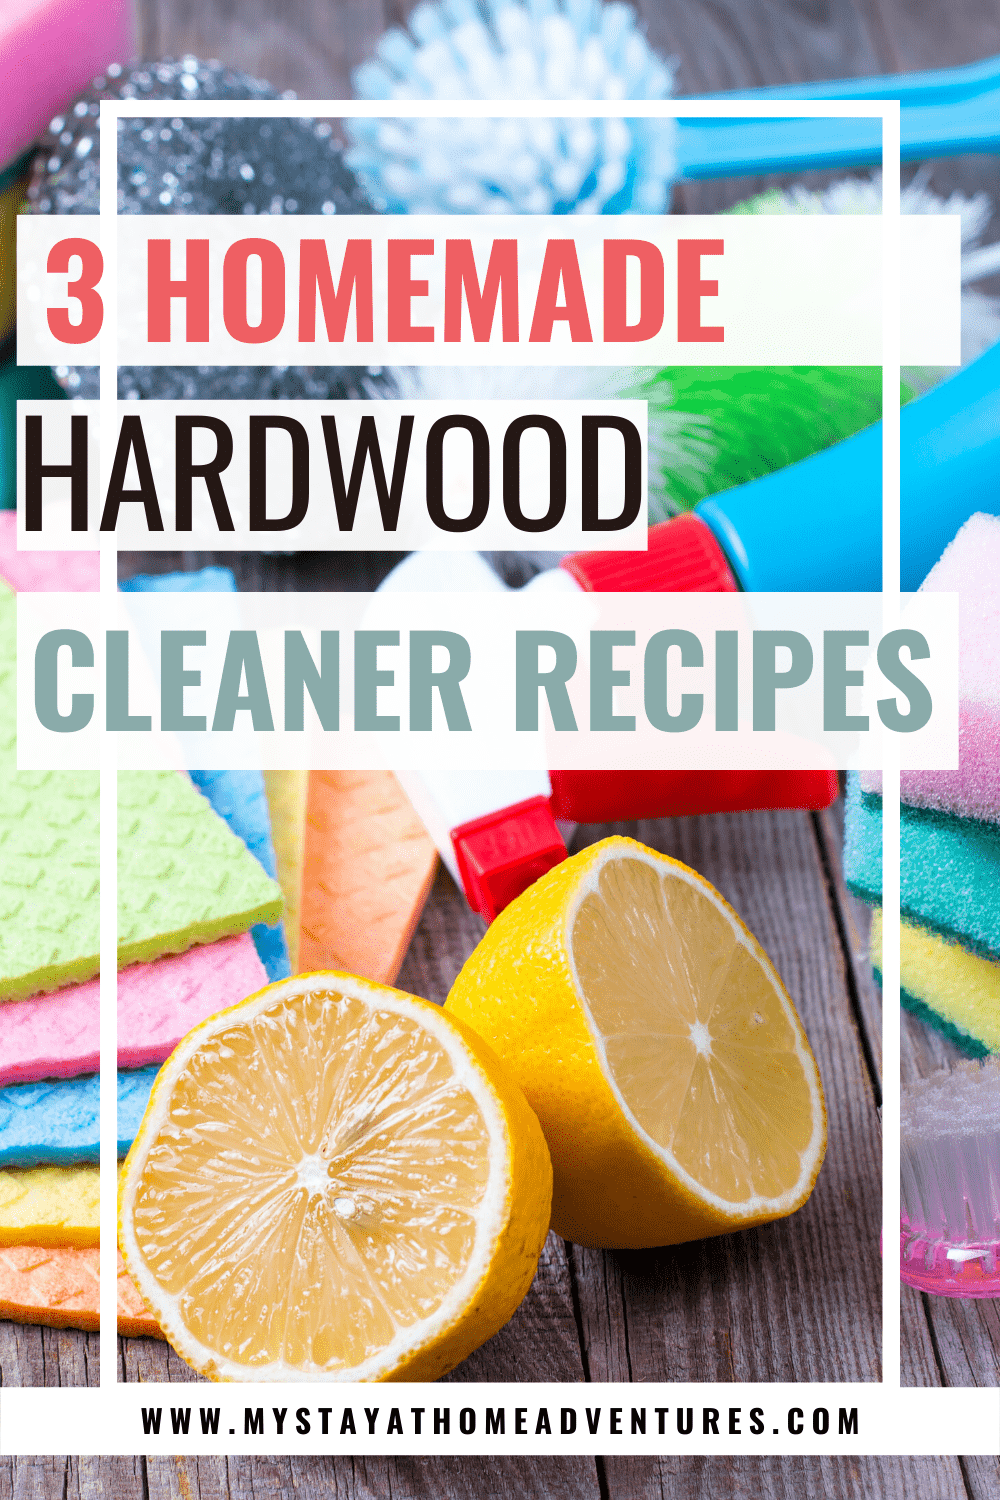 Learn how to make three homemade wood cleaner recipes and make your wood surfaces and floor shine without the use of harsh chemicals. via @mystayathome